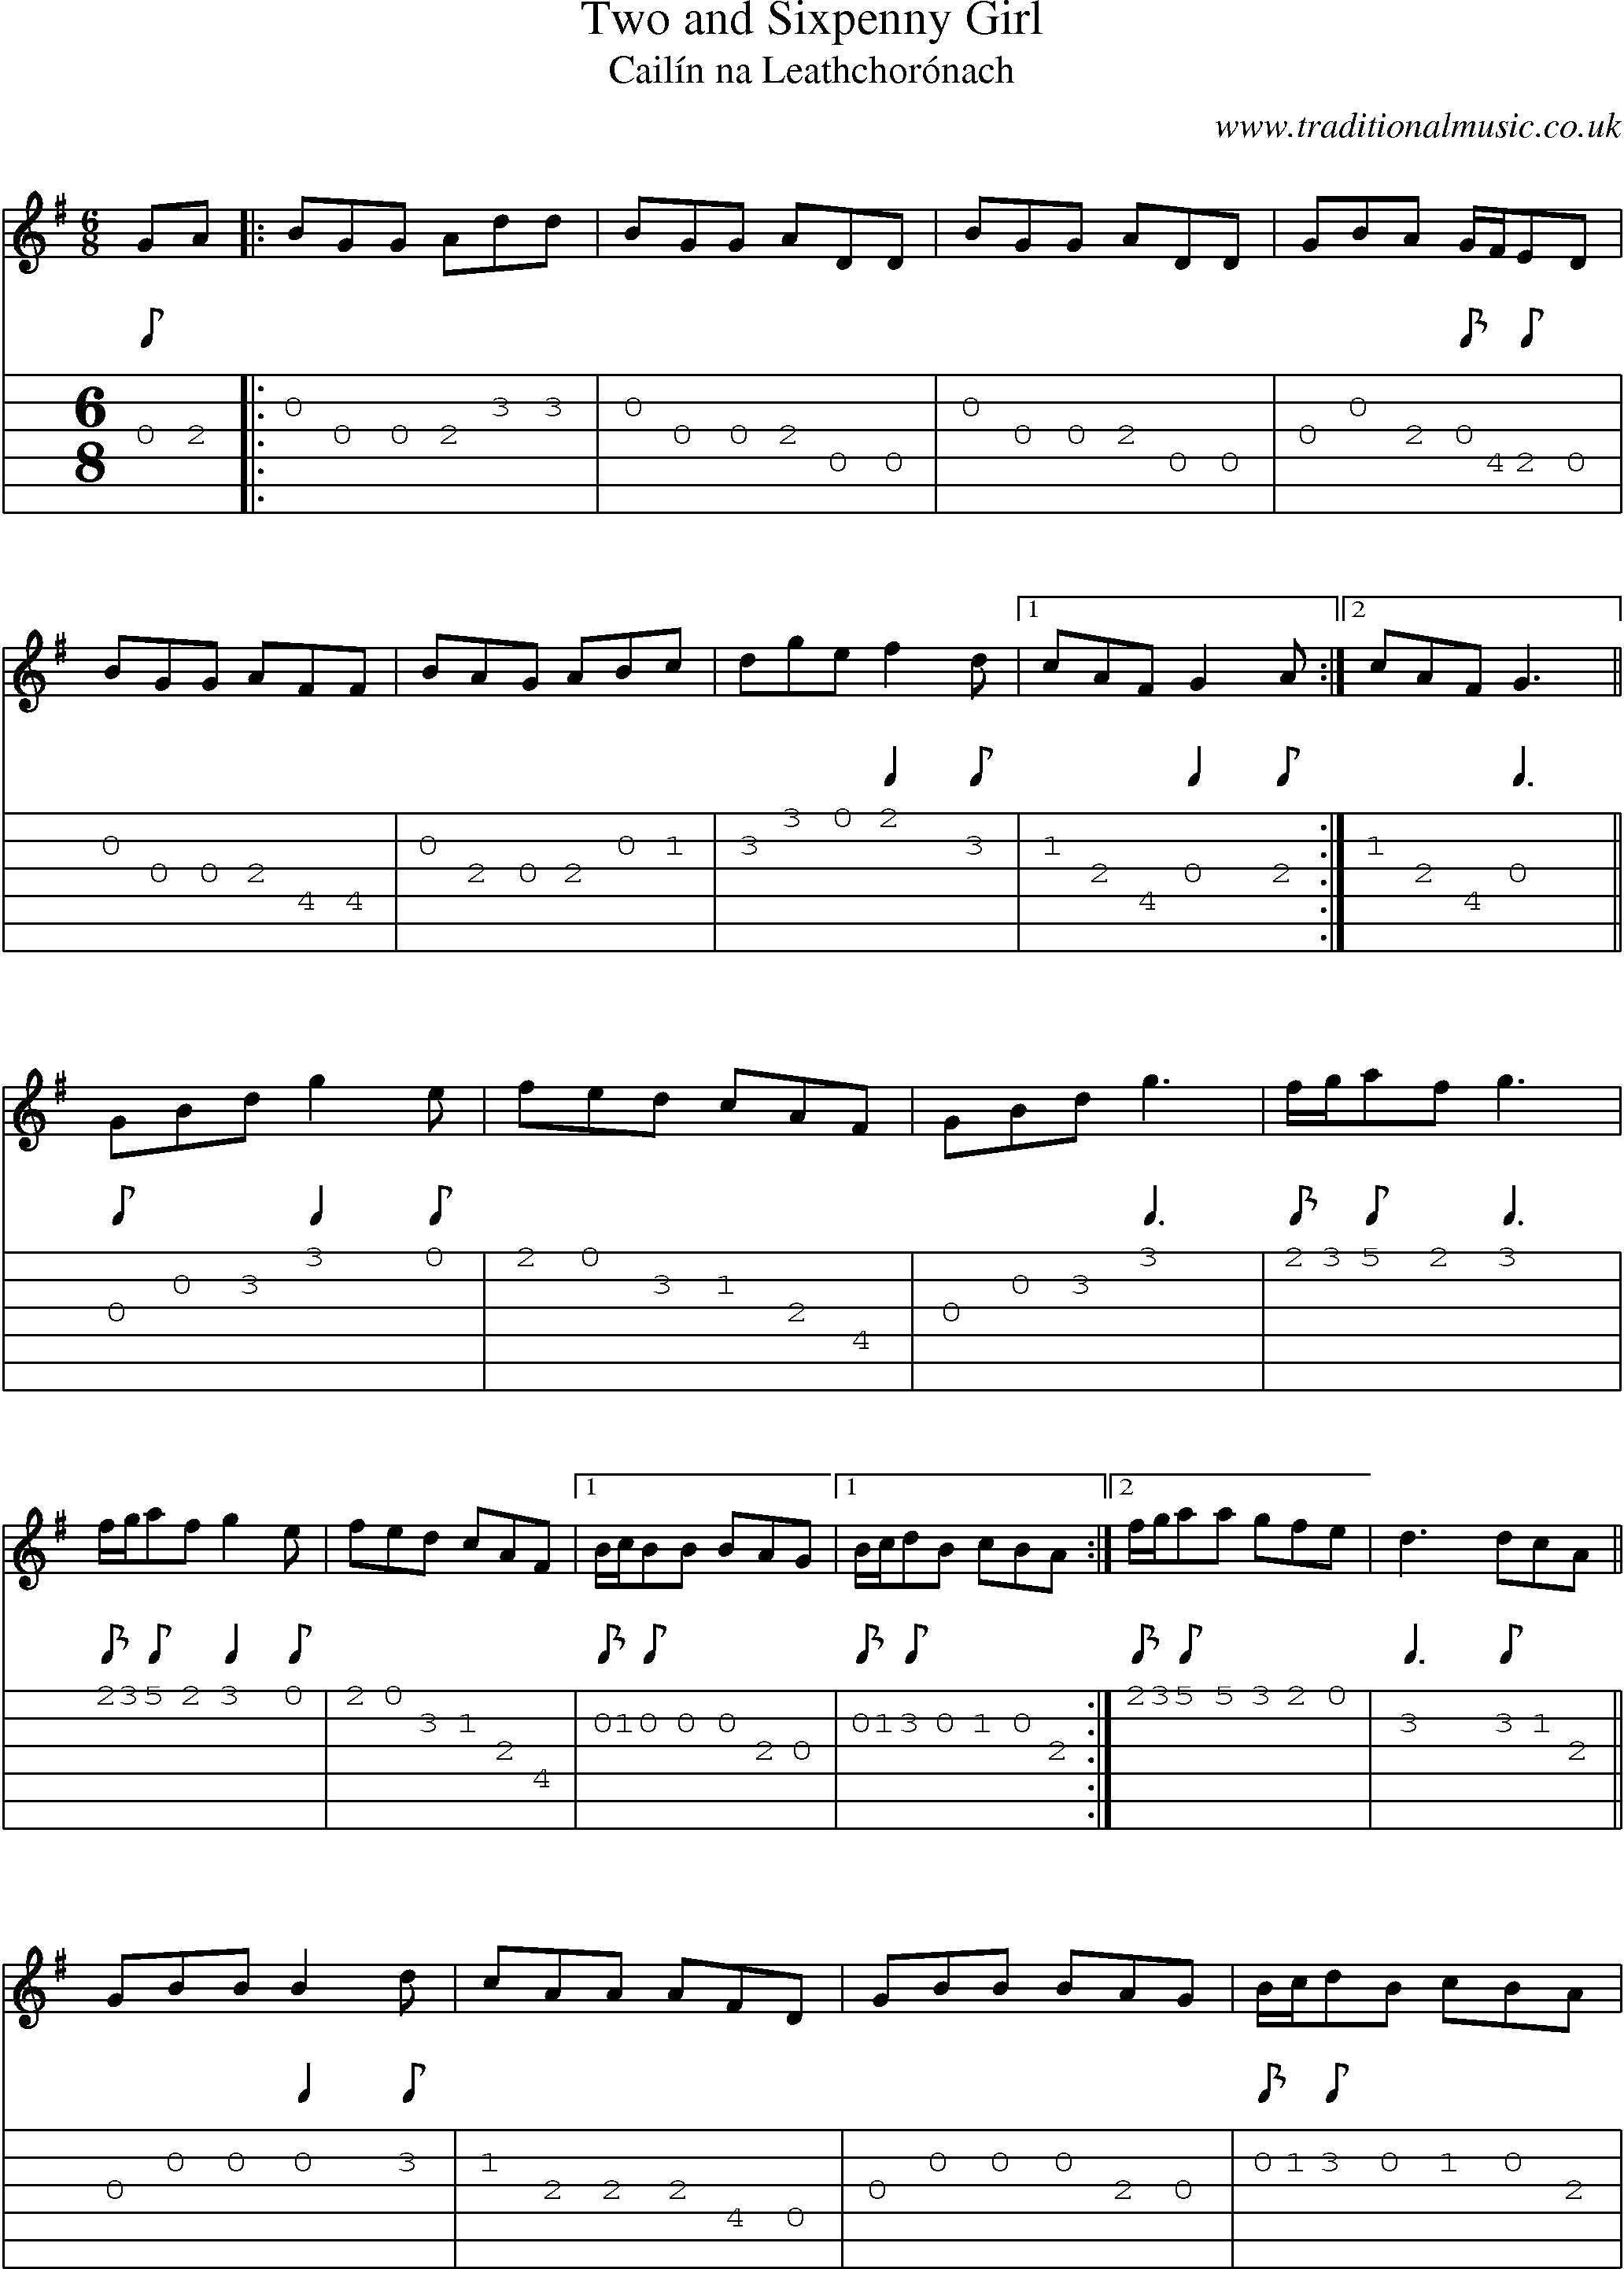 Music Score and Guitar Tabs for Two And Sixpenny Girl